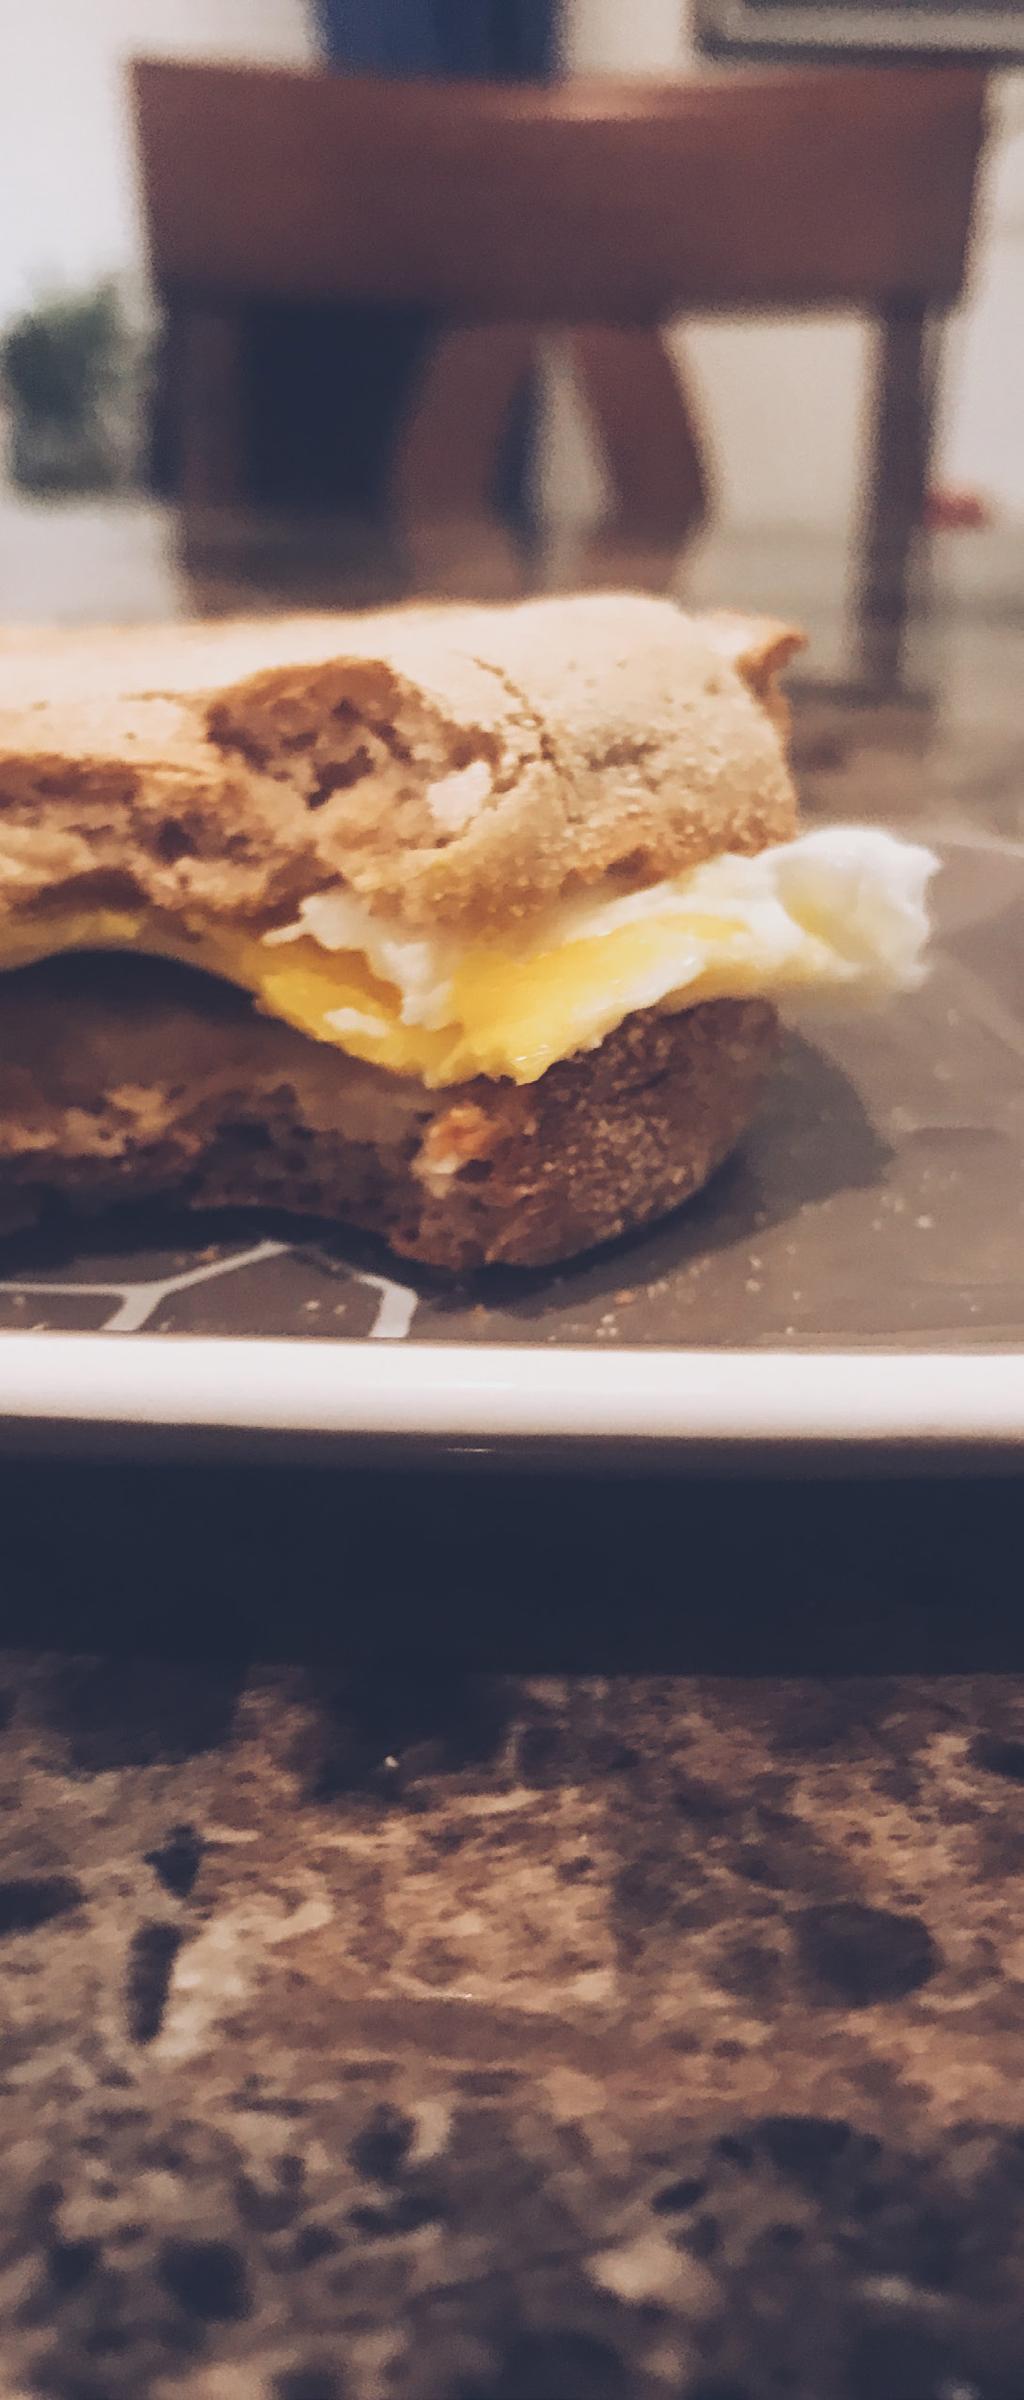 egg sandwich Prep Time: 5 min Total Time: 10 min 1 bagel thin or whole grain english muffin 1 egg 1 spreadable cheese wedge (such as laughing cow) 1. Toast bread. 2.